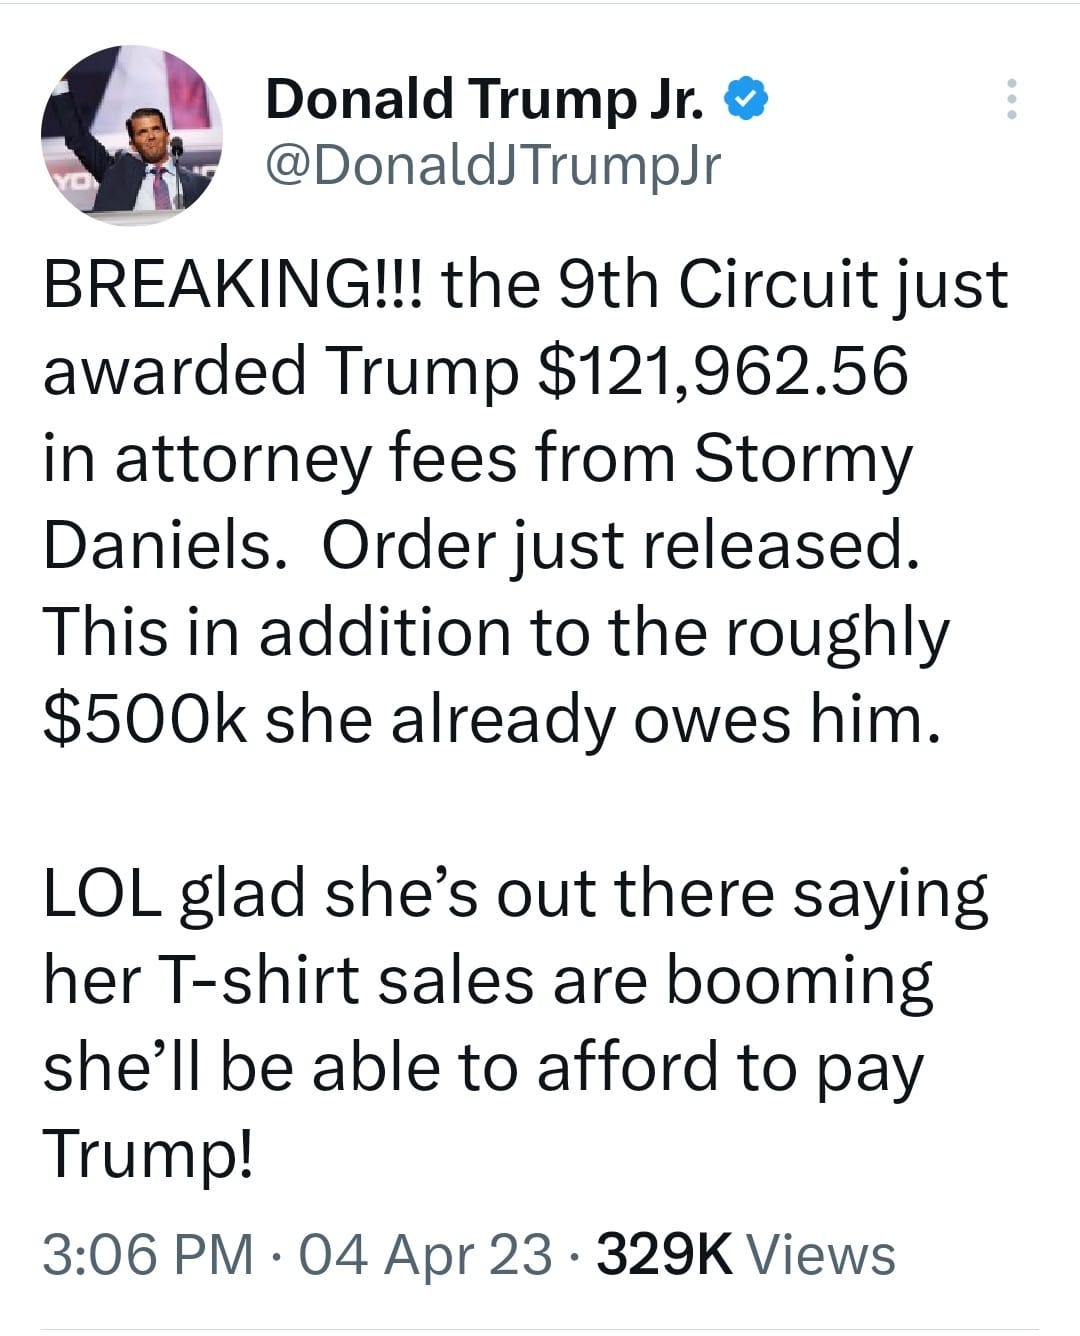 May be a Twitter screenshot of 1 person and text that says 'Donald Trump Jr. @DonaldJTrumpJr BREAKING!!! the 9th Circuit just awarded Trump $121,962.56 in attorney fees from Stormy Daniels. Order just released. This in addition to the roughly $500k she already owes him. LOL glad she's out there saying her T-shirt sales are booming she'll be able to afford to pay Trump! 3:06 PM 04 Apr 23 329K Views'